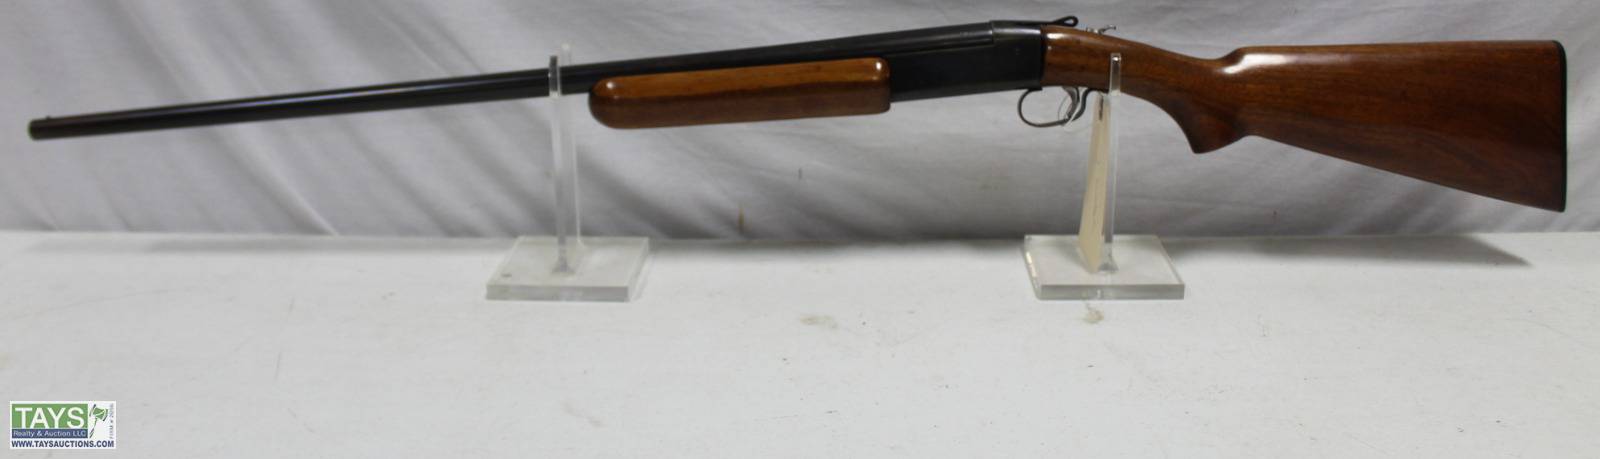 ONLINE ABSOLUTE AUCTION: FIREARMS - COINS - KNIVES - AMMO